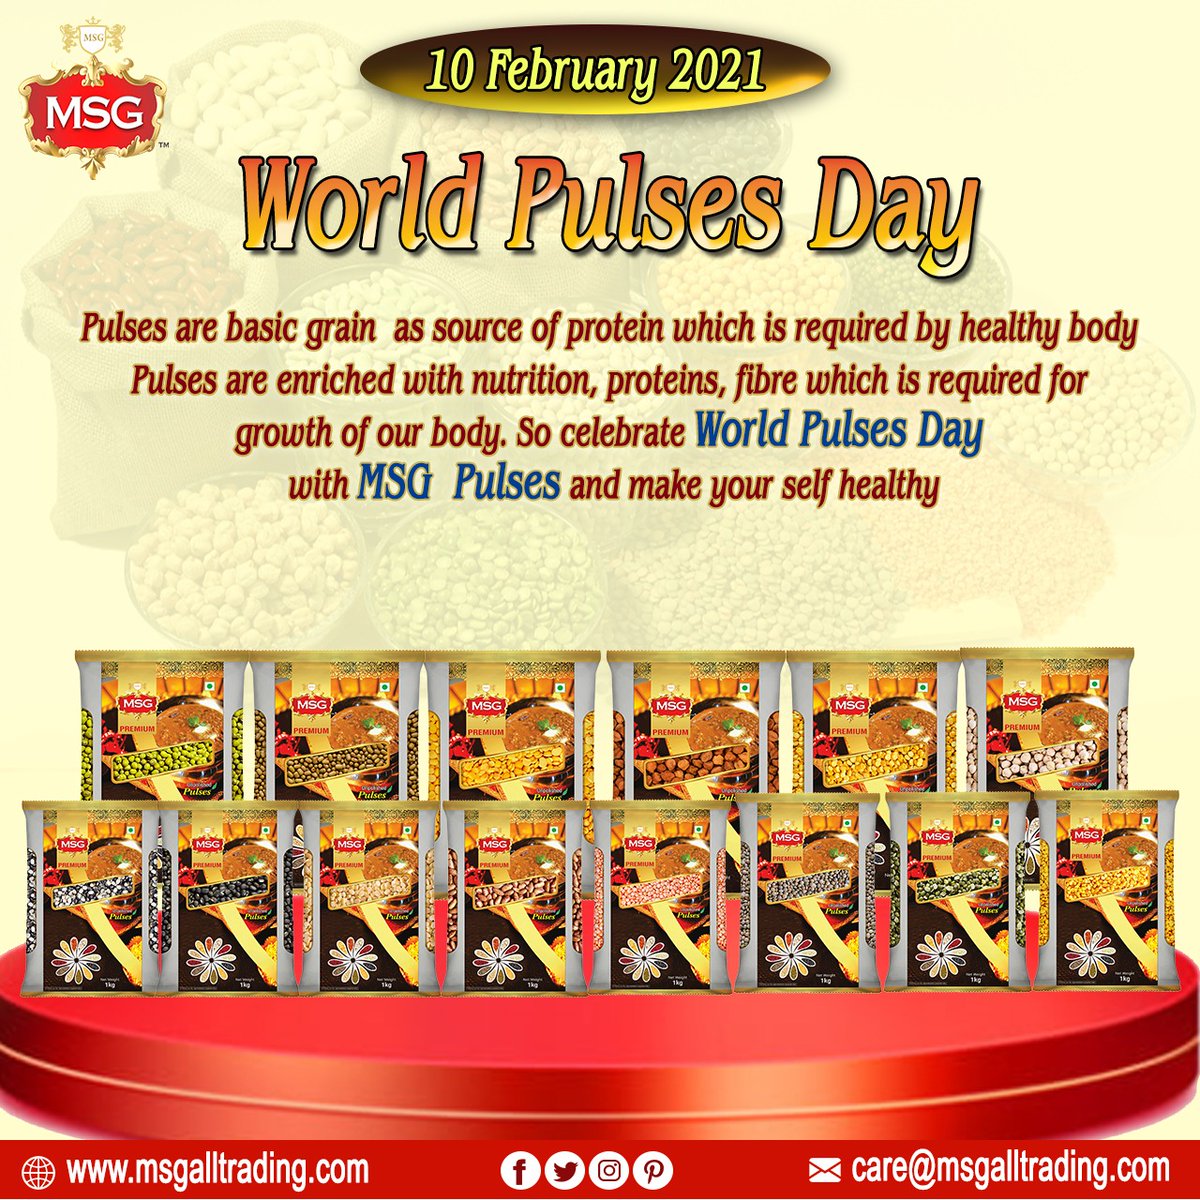 MSG Pulse are enriched with nutrition, protein, fibre which is essential for good health. 

It is purely organic 
It contain all nutrients 
It consist proteins 
It is easily digestible

#MSGPulses
#ArharDal
#ChanaBlack
#ChanaDal
#ChanaWhite
#MasoorDal
#MasoorWhole
#MoongChilka